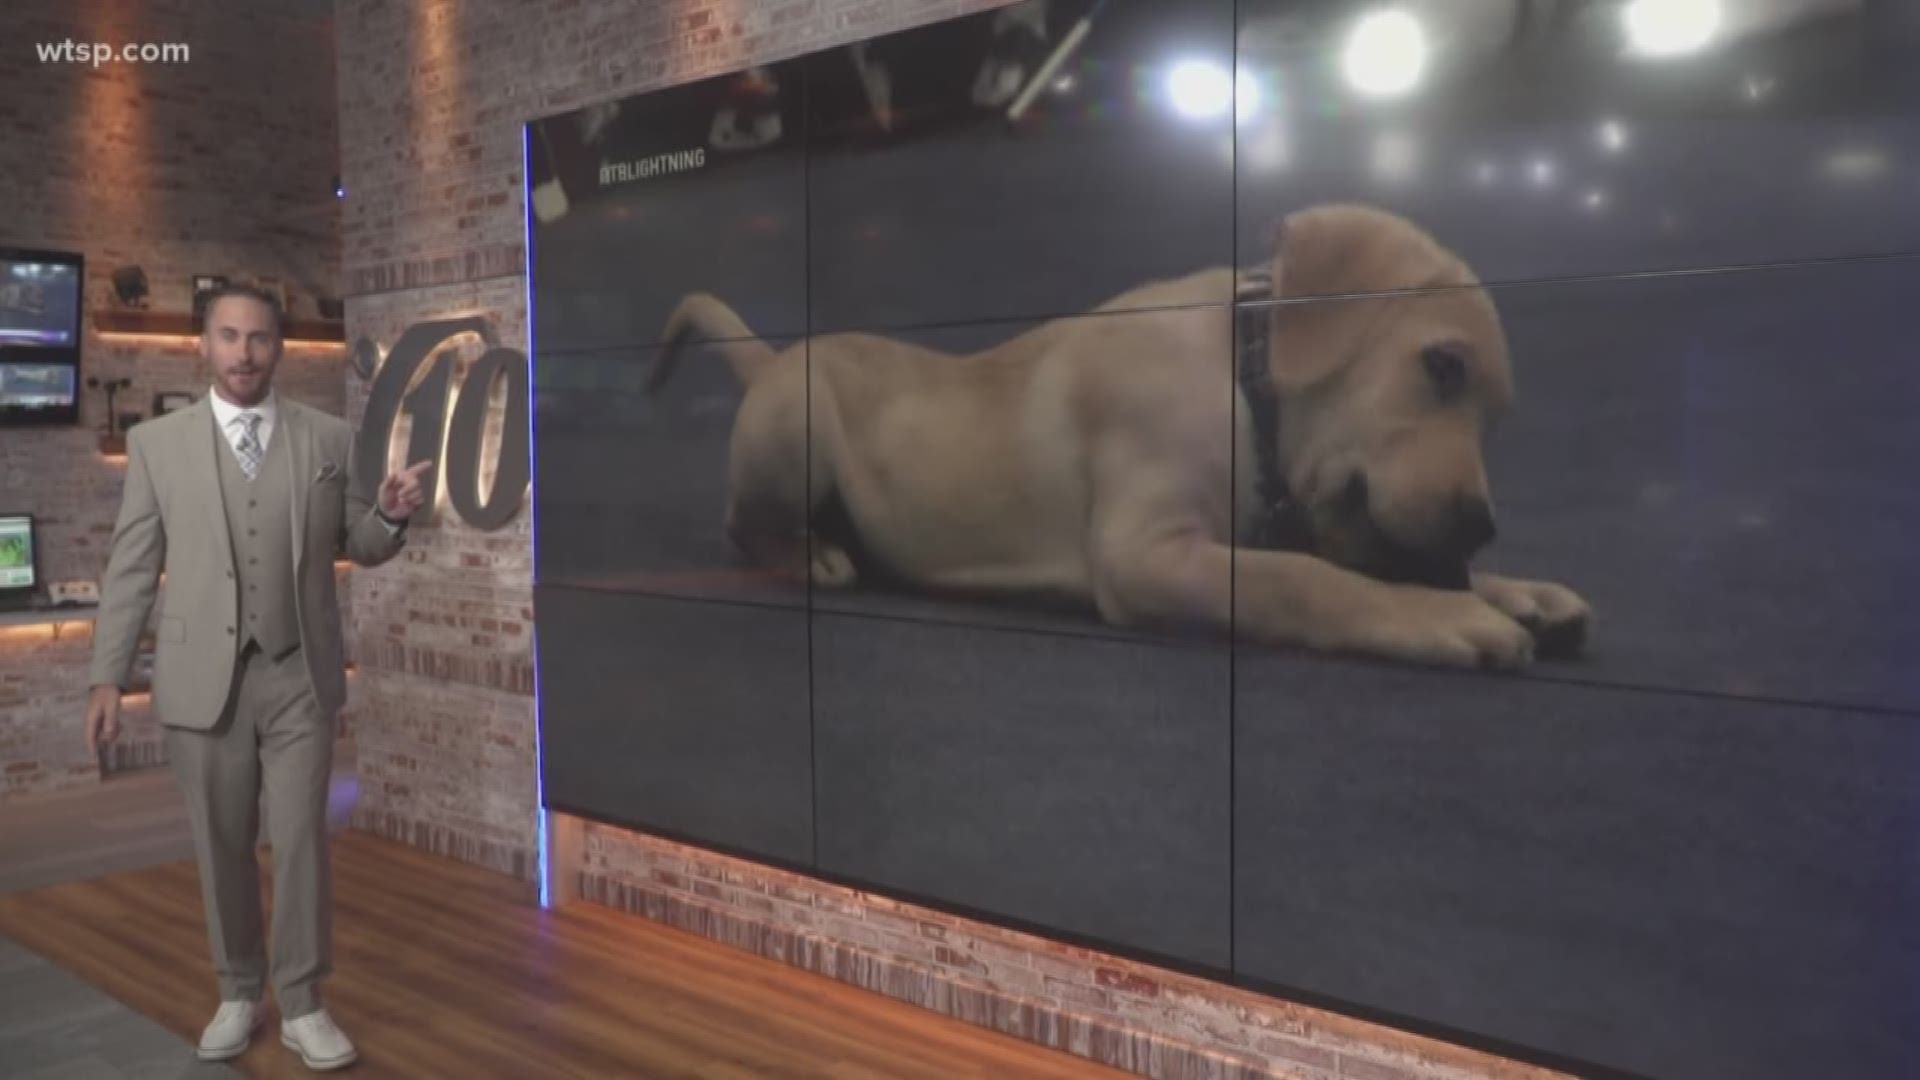 The Tampa Bay Lightning's newest addition is lending a paw to show support for the team. 

'Bolt' the yellow lab puppy was introduced as the team's new ambassador. https://on.wtsp.com/2OGTWiw